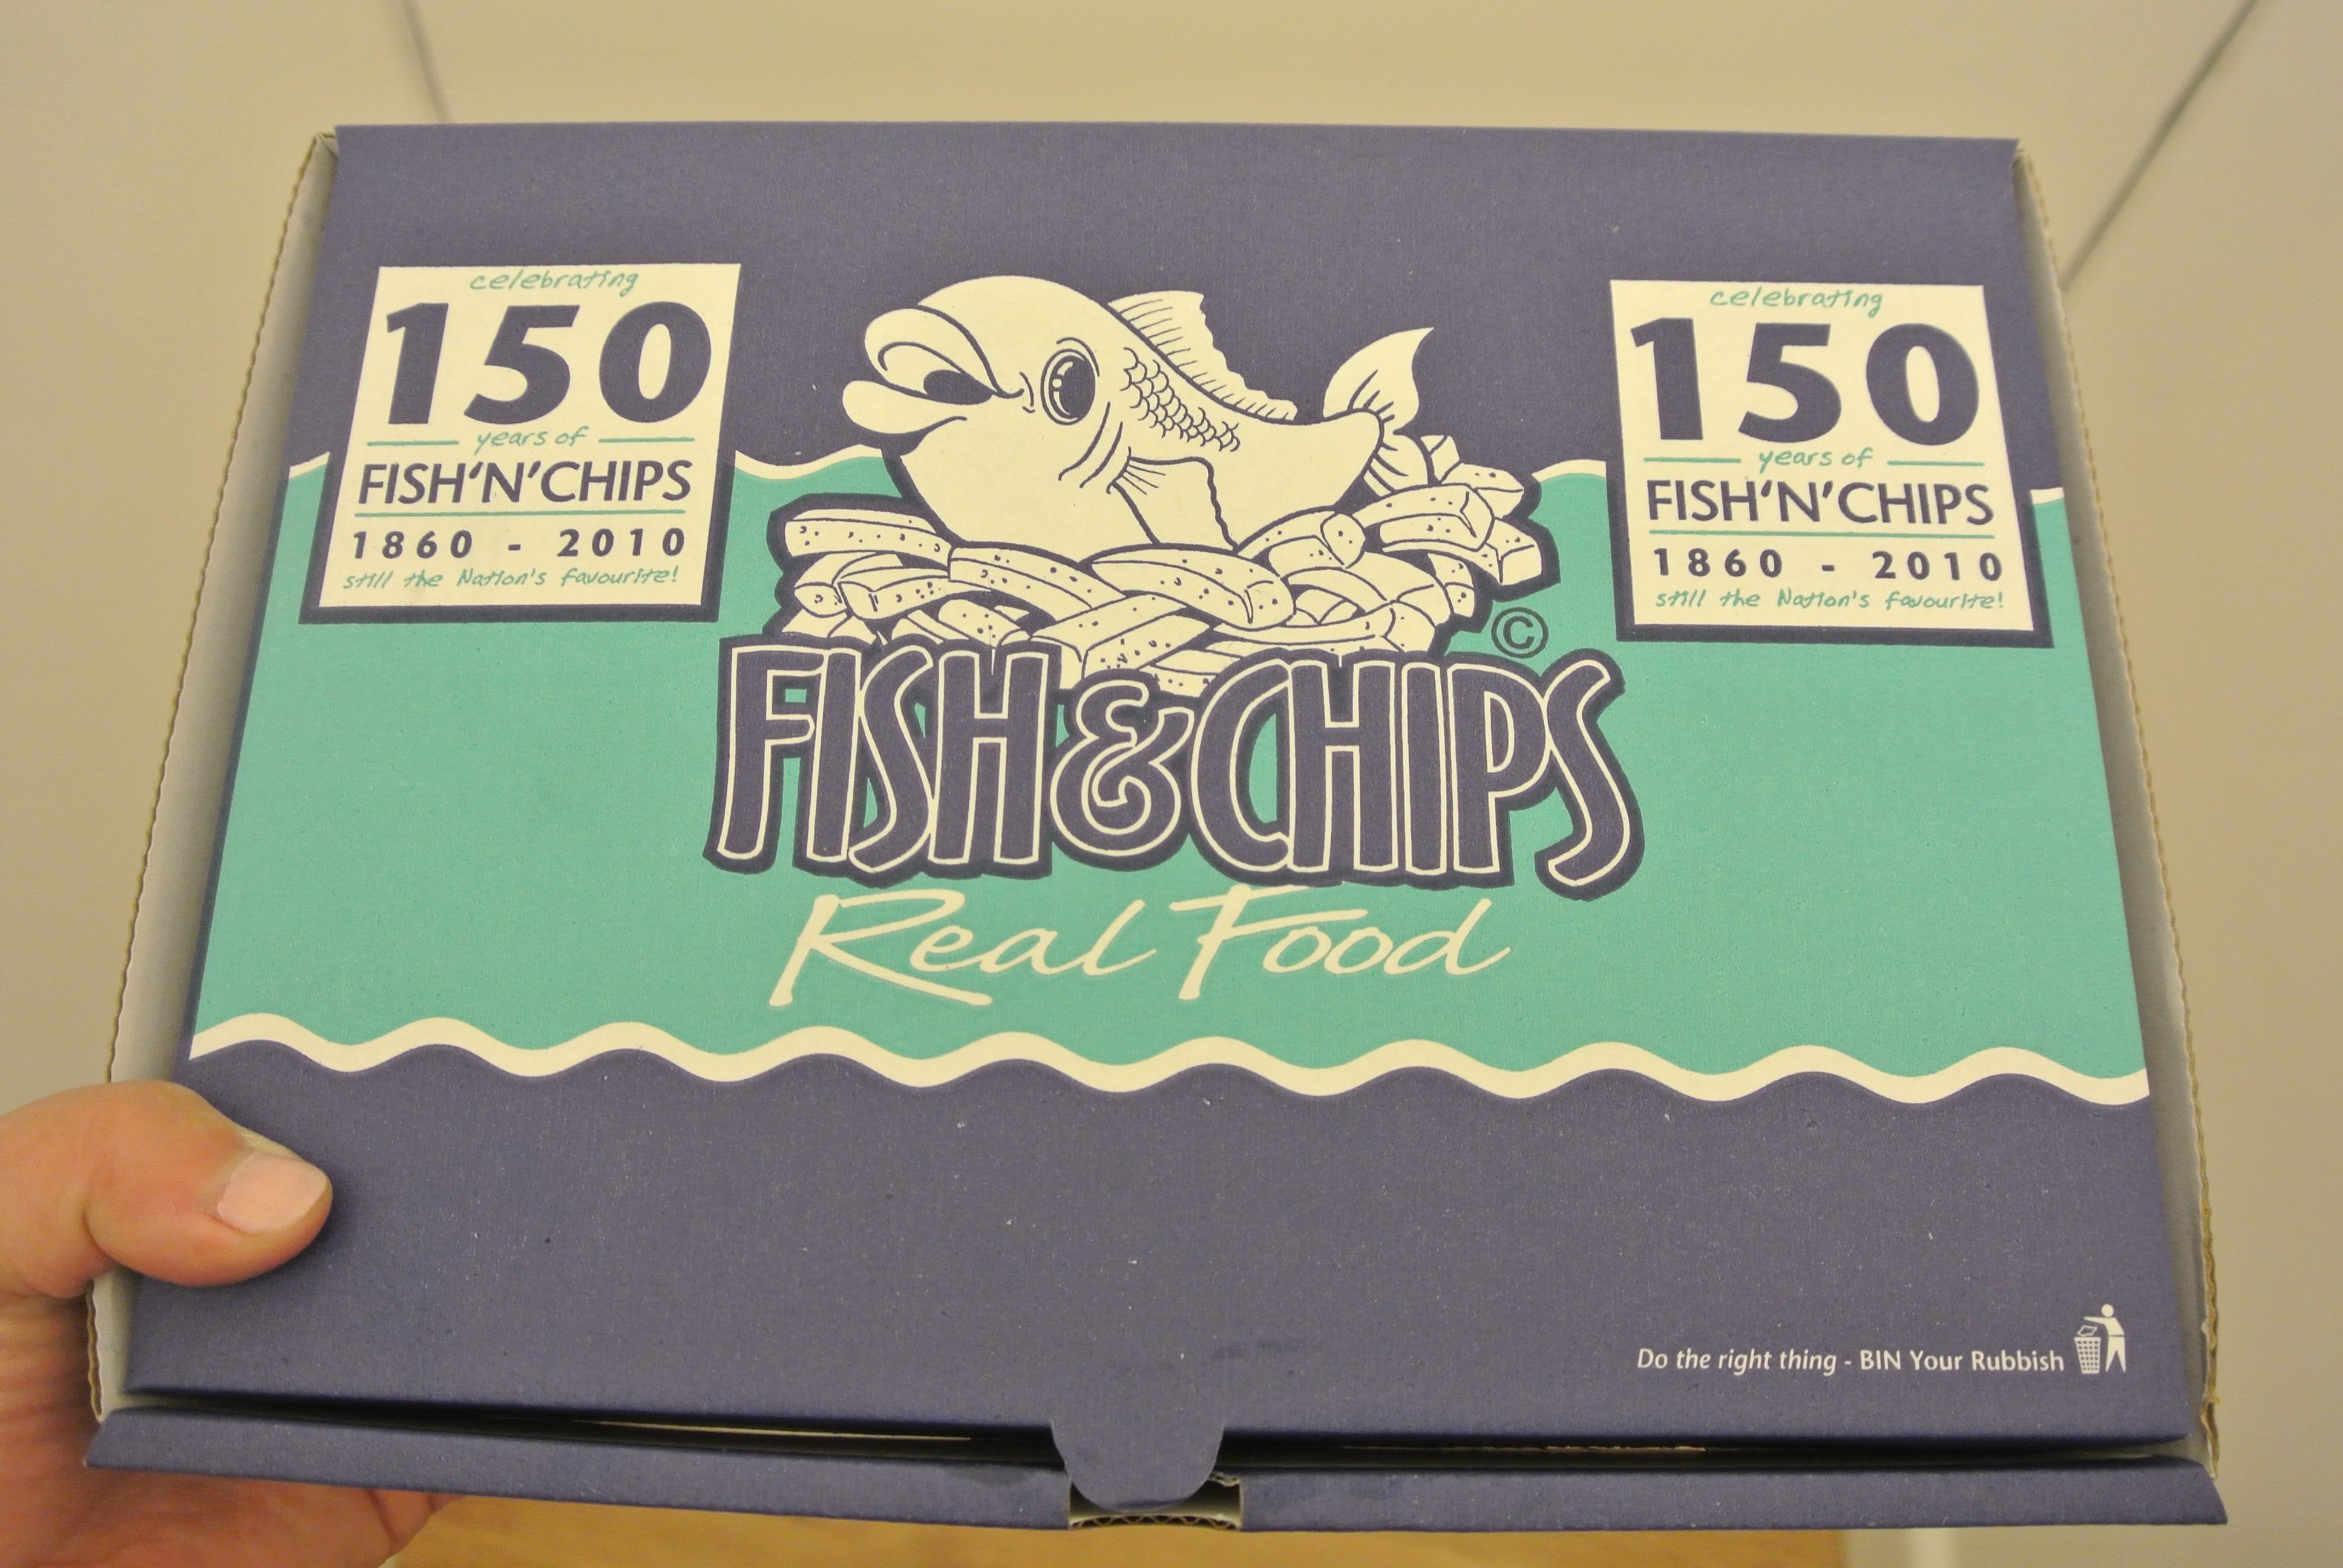 Boxed fish and chips.